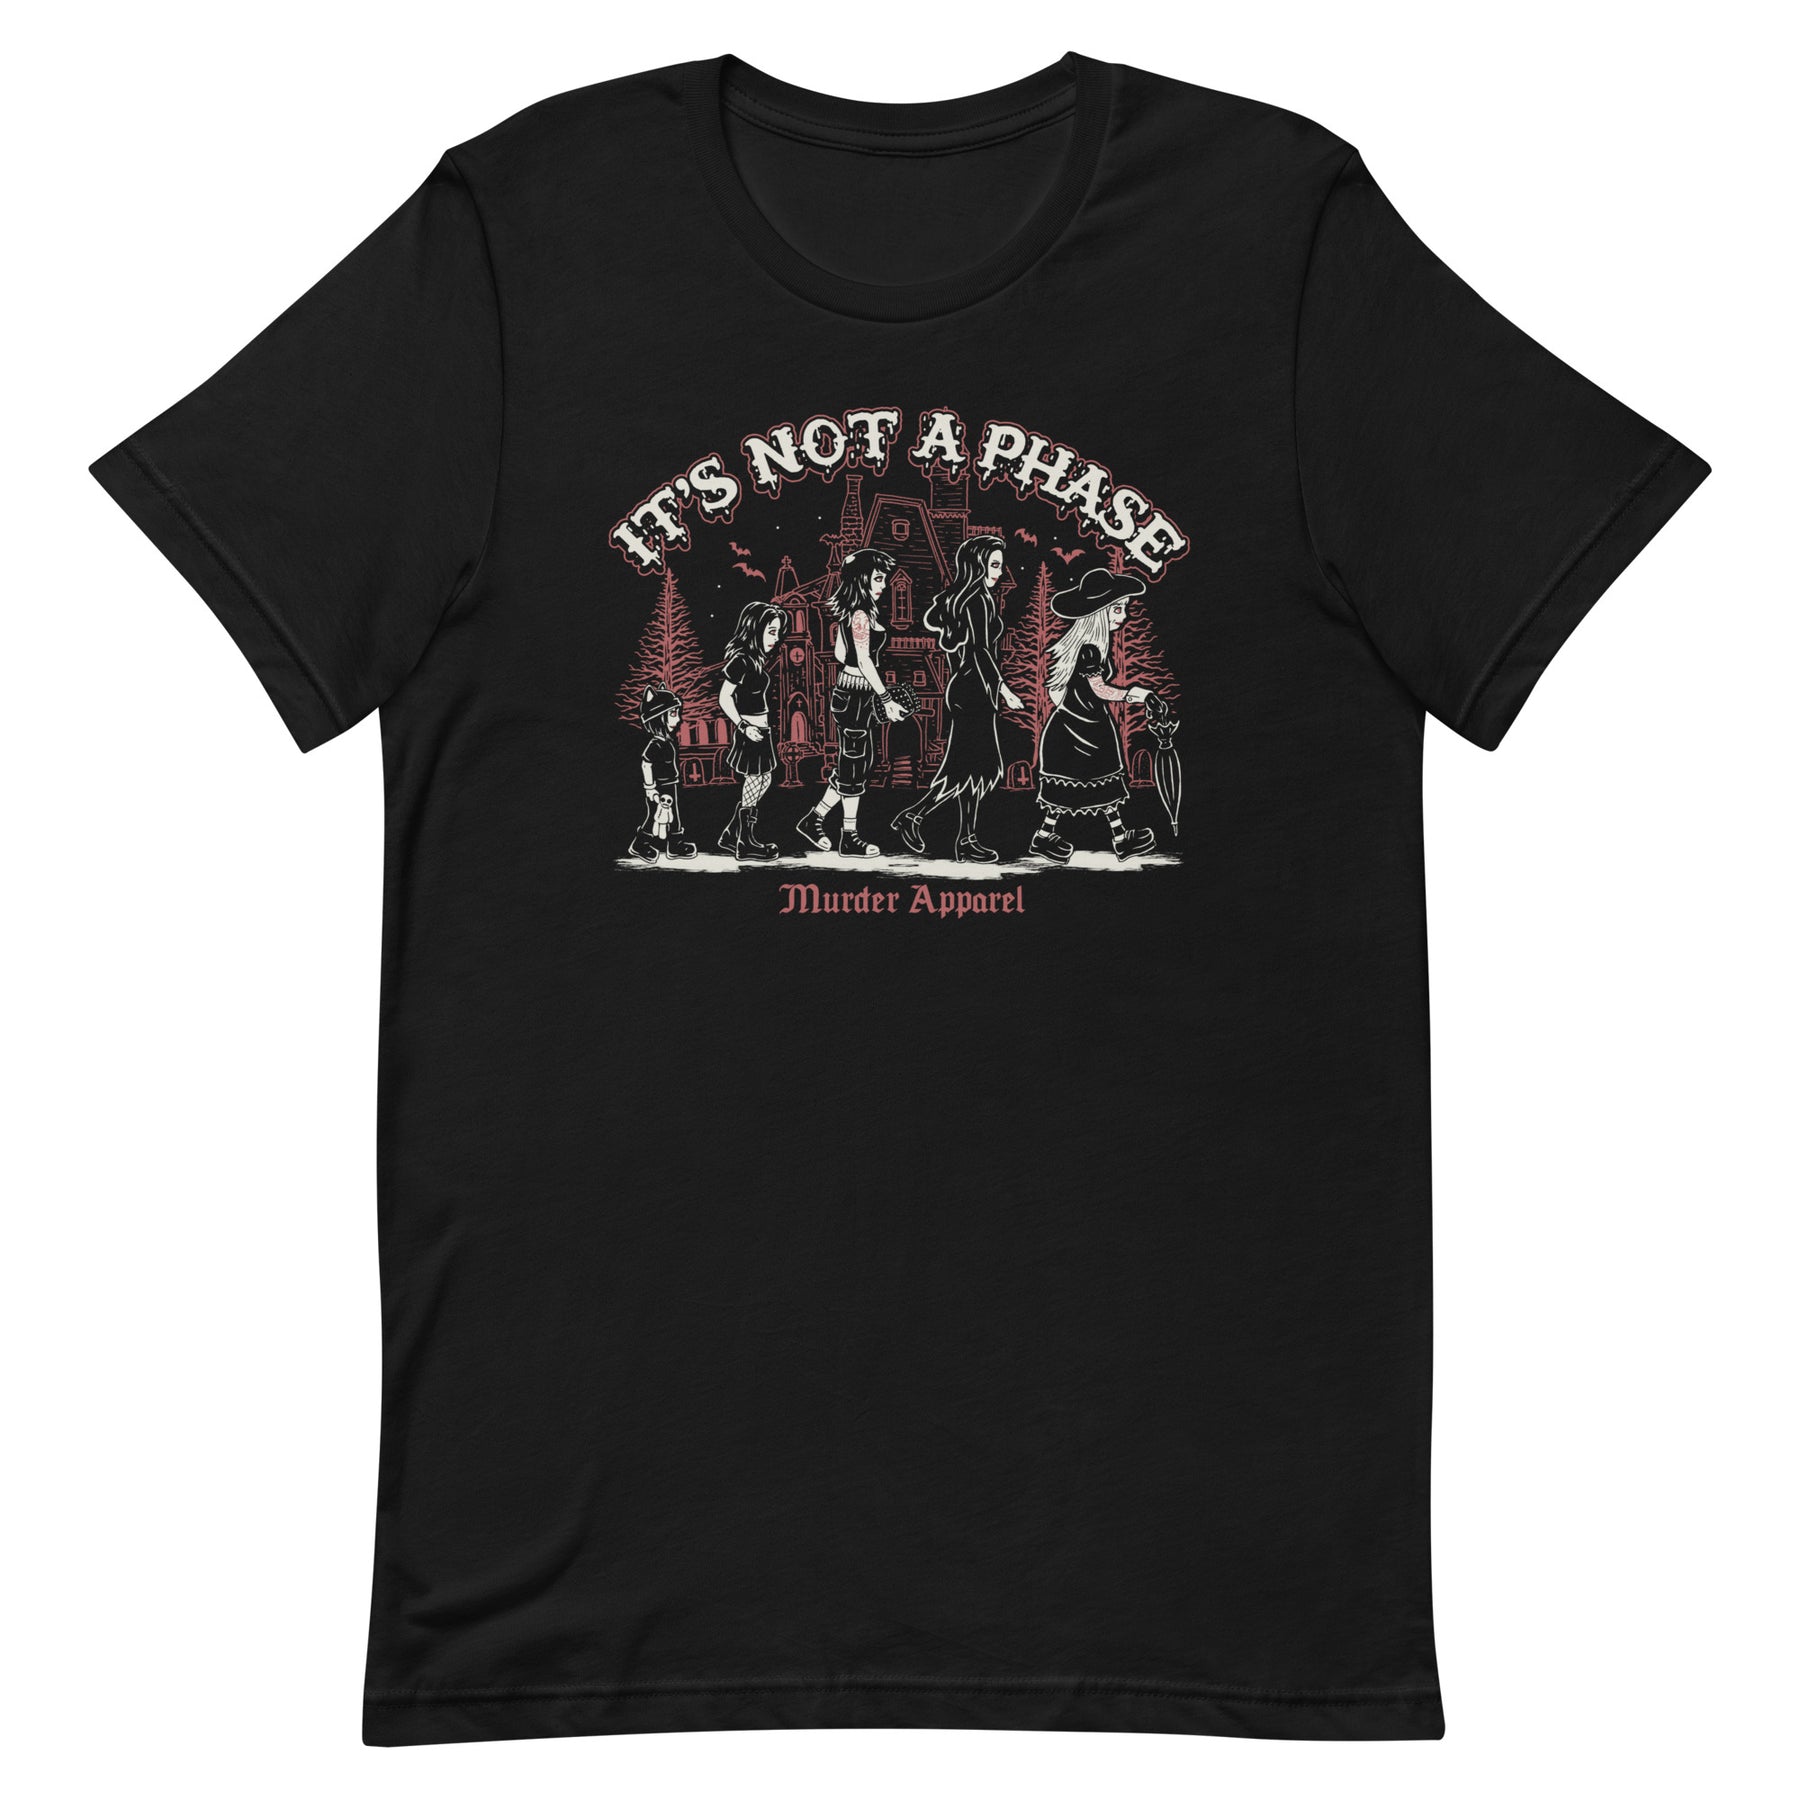 It's Not A Phase T-Shirt | Murder Apparel